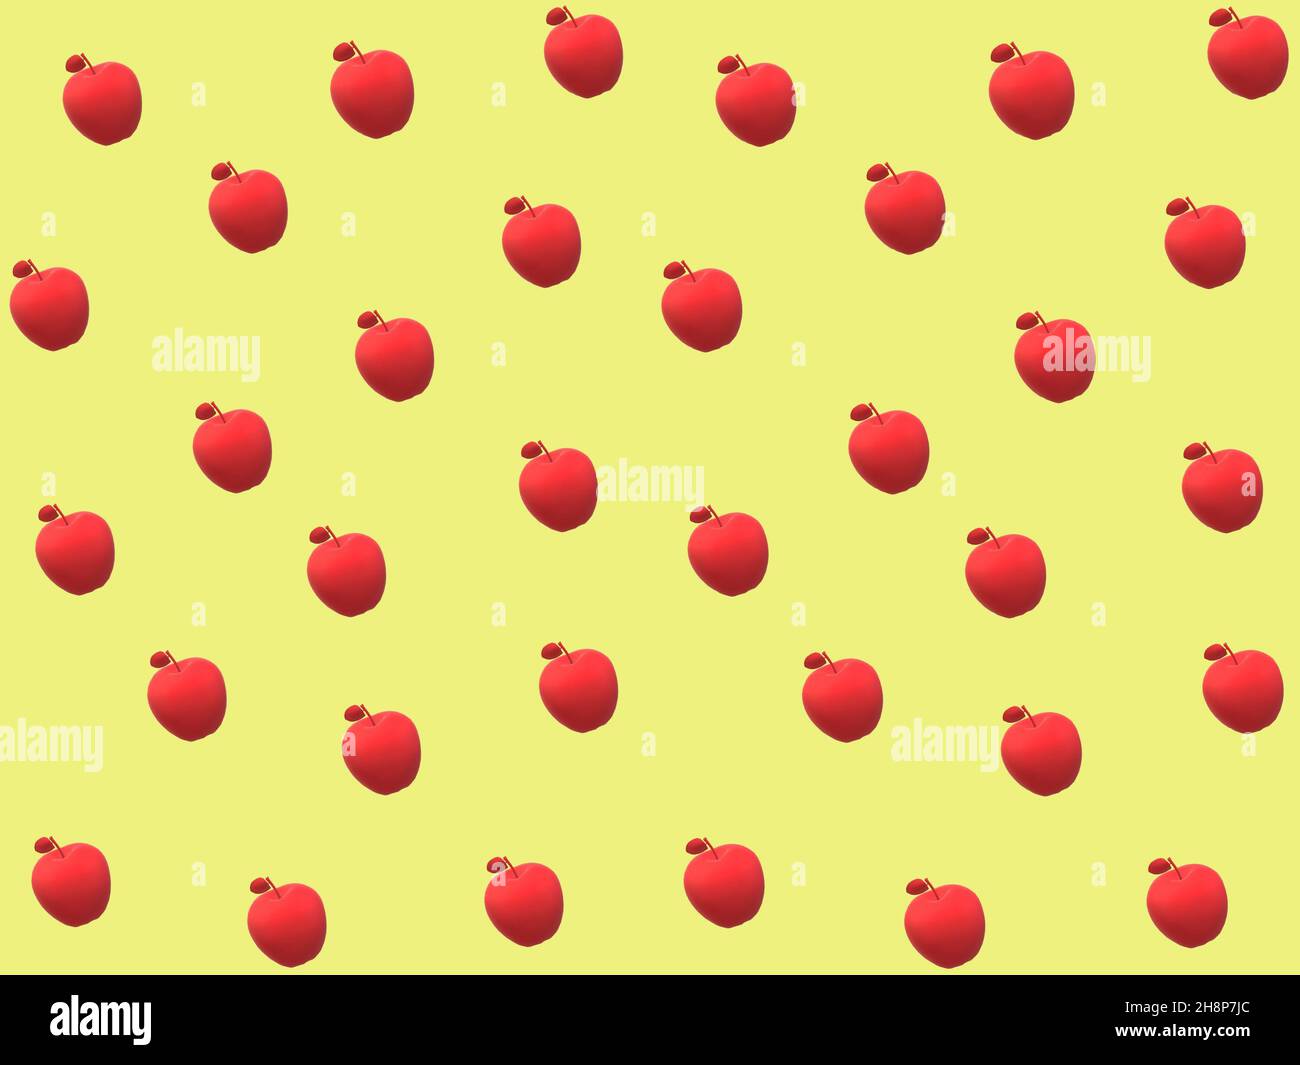 3D illustration. Bright red apple fruits on a yellow background. Wrapping or gift paper design. Stock Photo